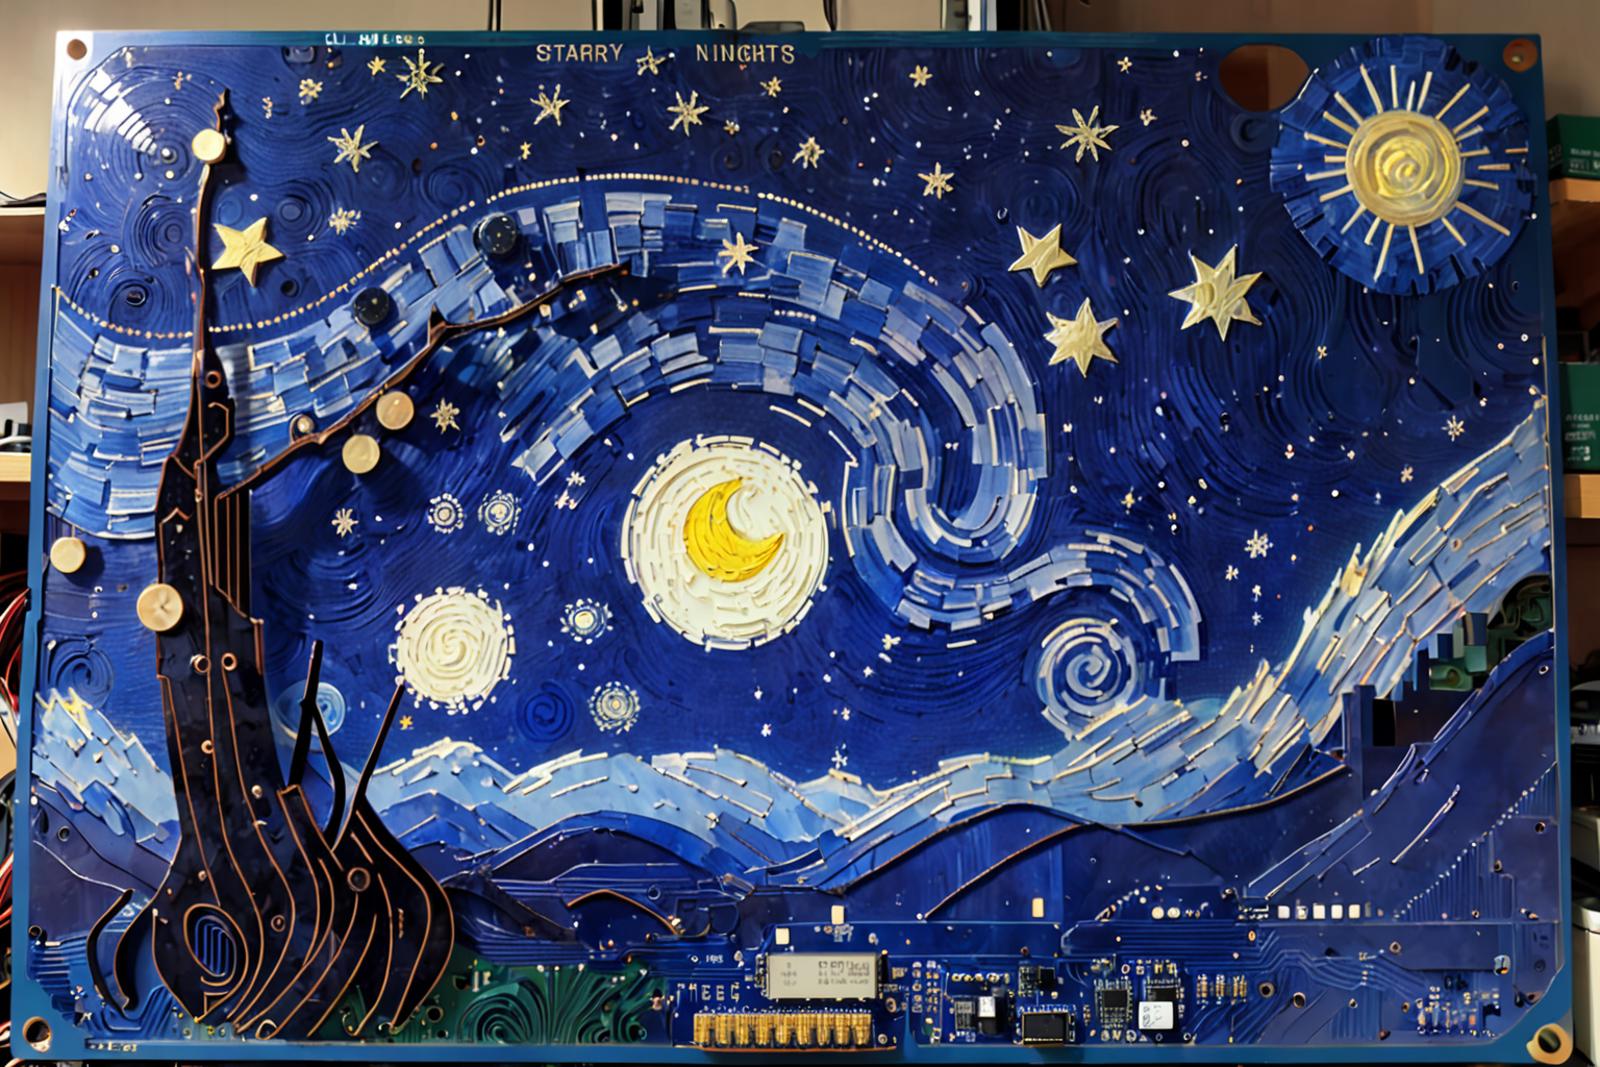 A colorful mosaic artwork of the night sky with a moon, stars, and a tree.